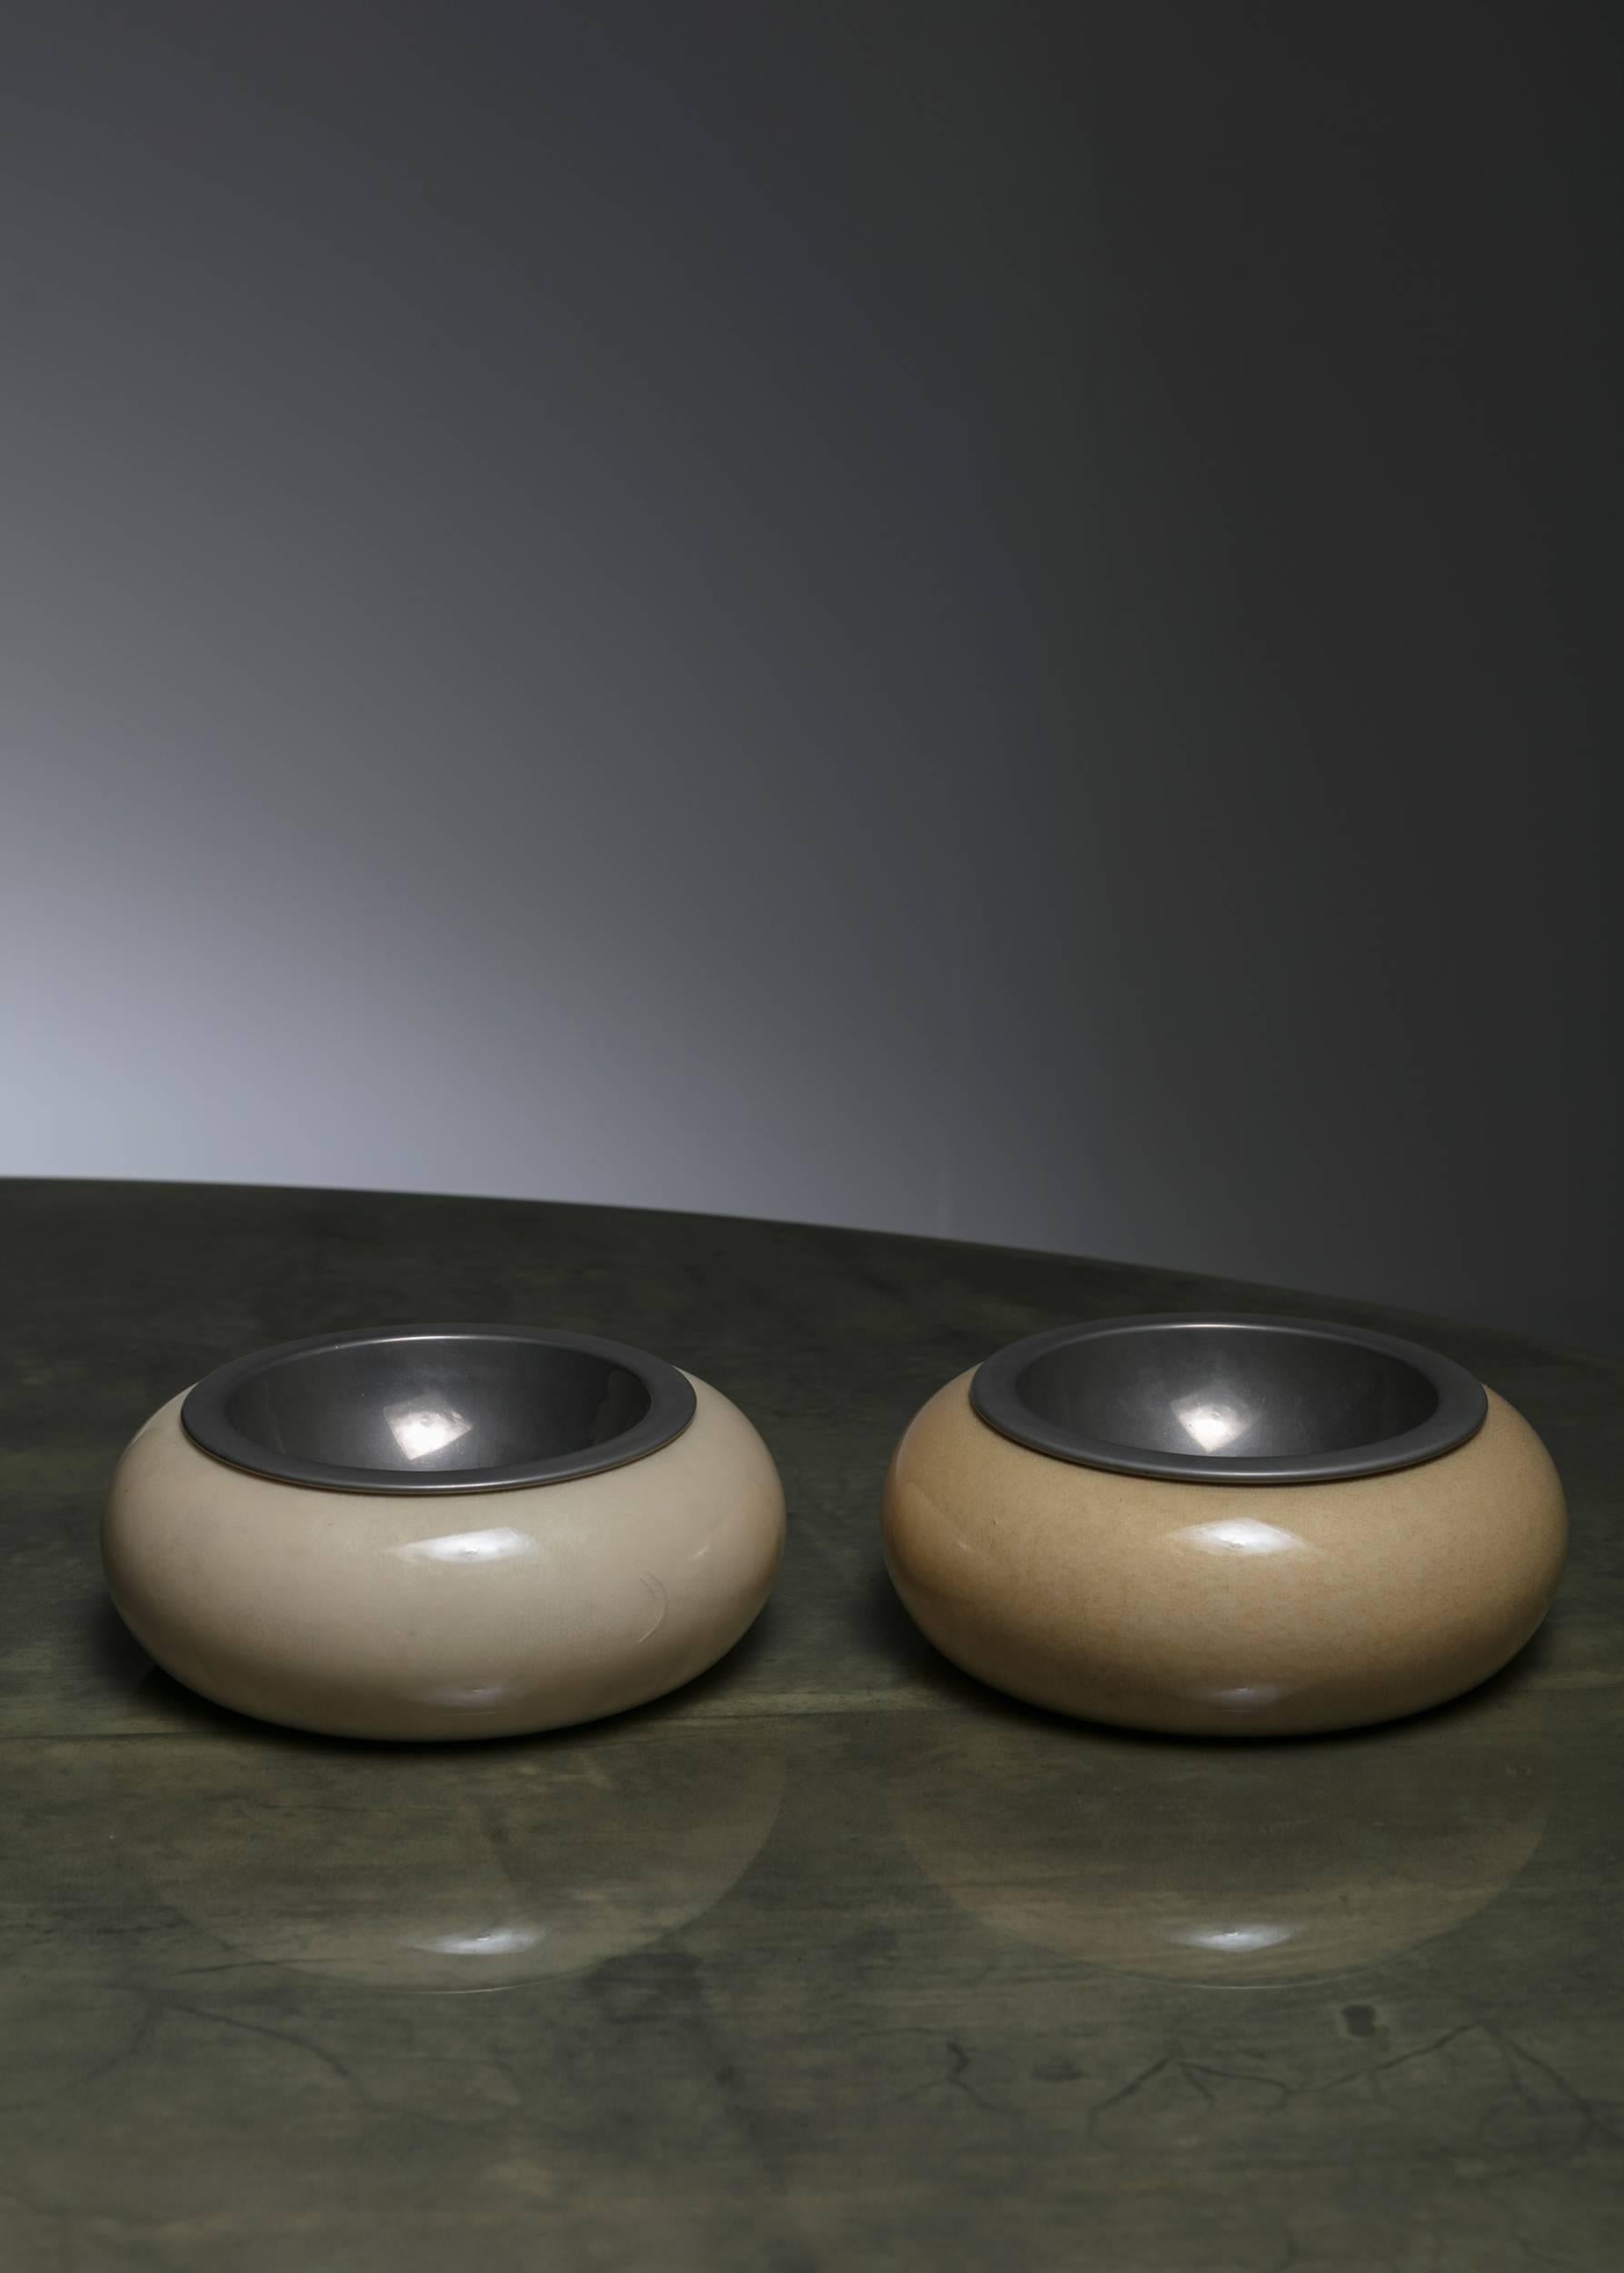 Pair of bowls by Aldo Tura.
Parchment covered wood pieces with removable metal element.